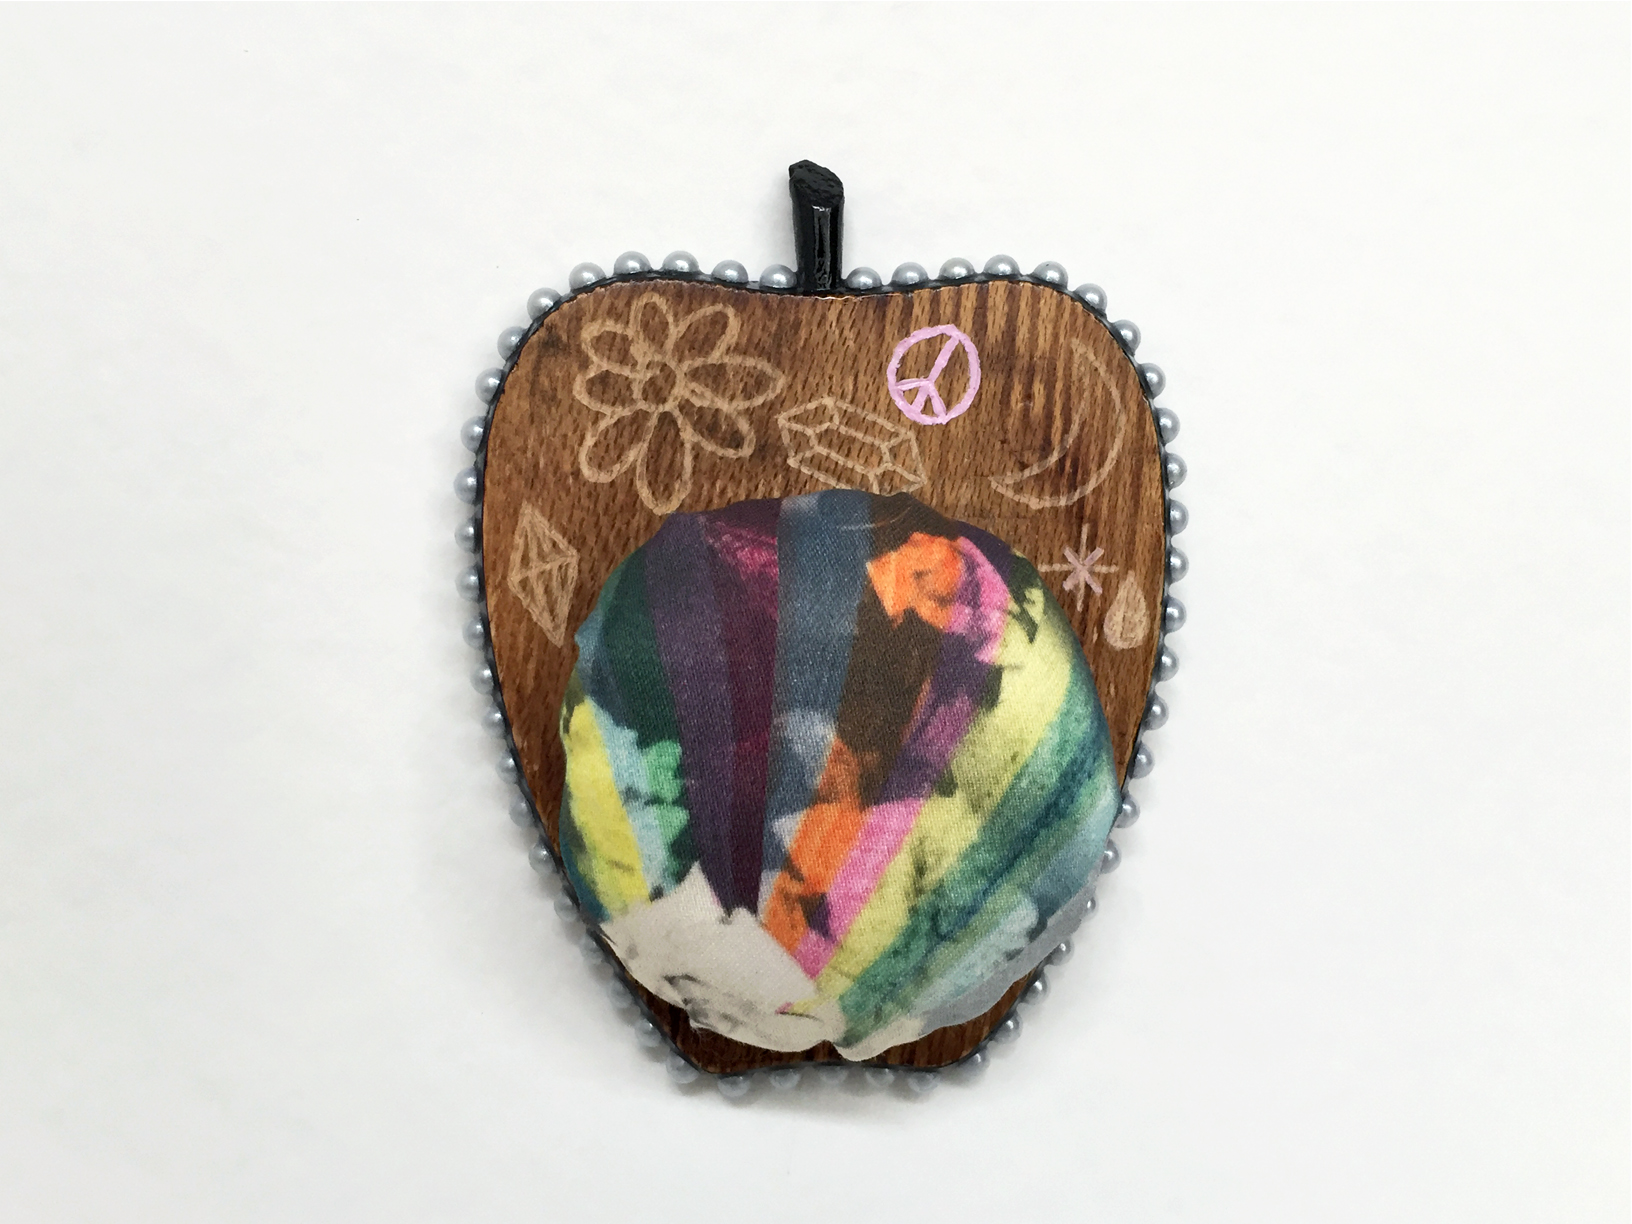 Apple Isle Pincushion #6, 2019, found wood coaster (engraved), handmade paper collage digitally printed on cotton sateen, plastic pearls, acrylic paint, resin, 120mm x 96mm